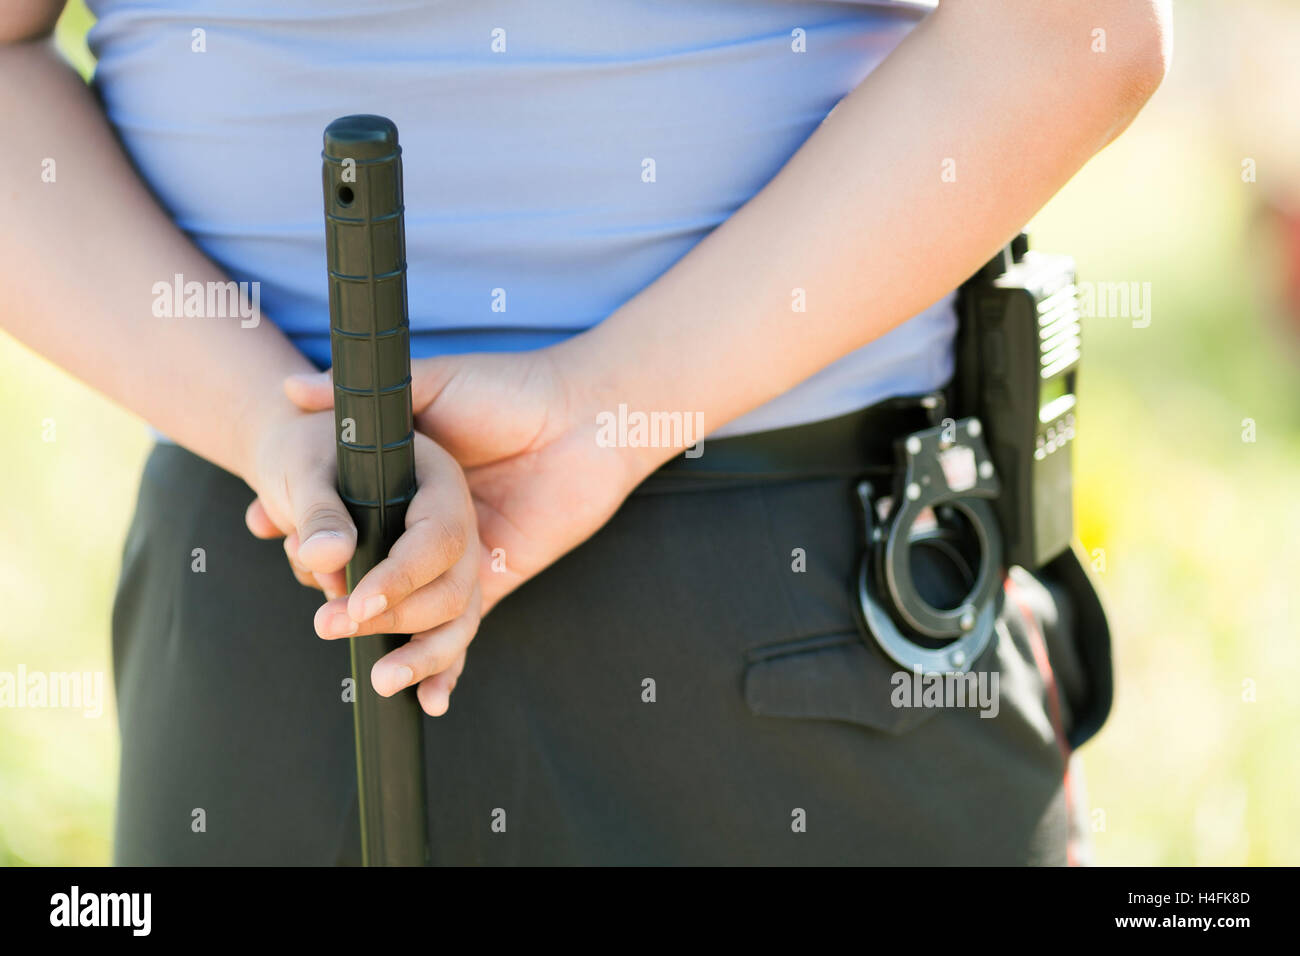 hands of the police officer holding a baton tonfa close up Stock Photo